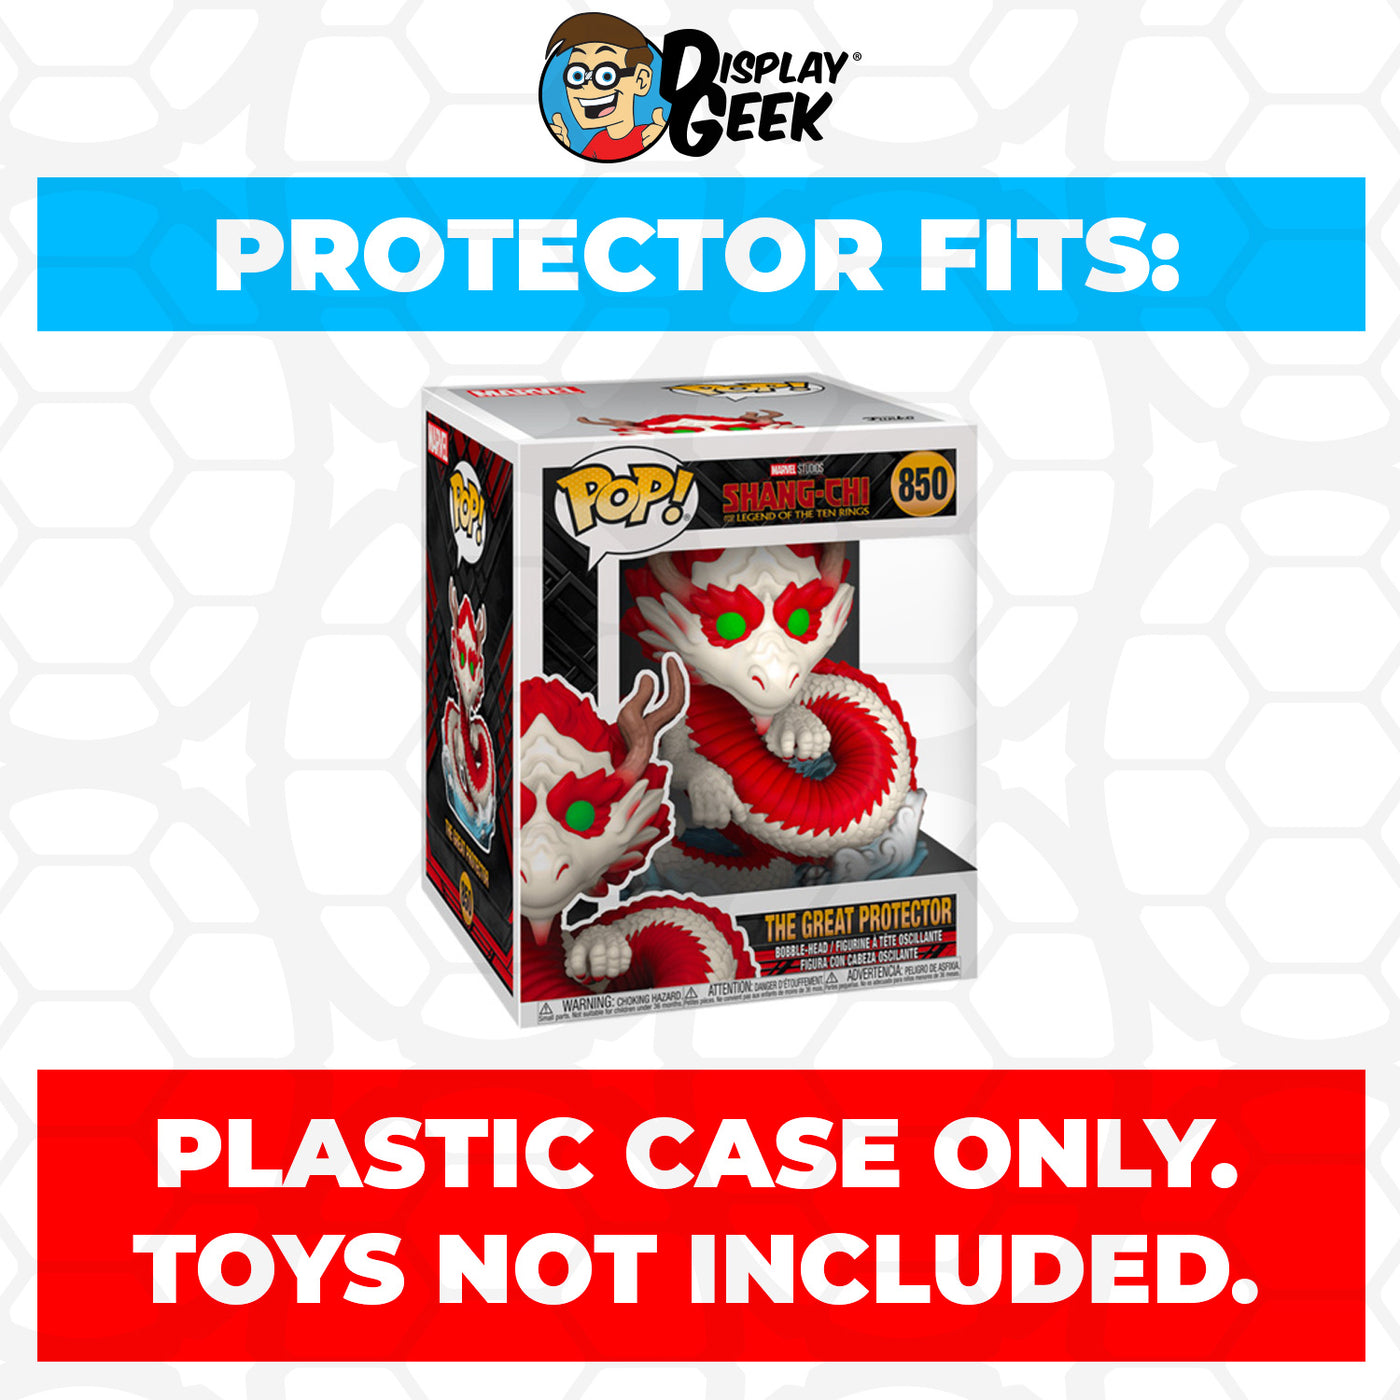 Pop Protector for 6 inch Shang-Chi The Great Protector #850 Super Size Funko Pop on The Protector Guide App by Display Geek